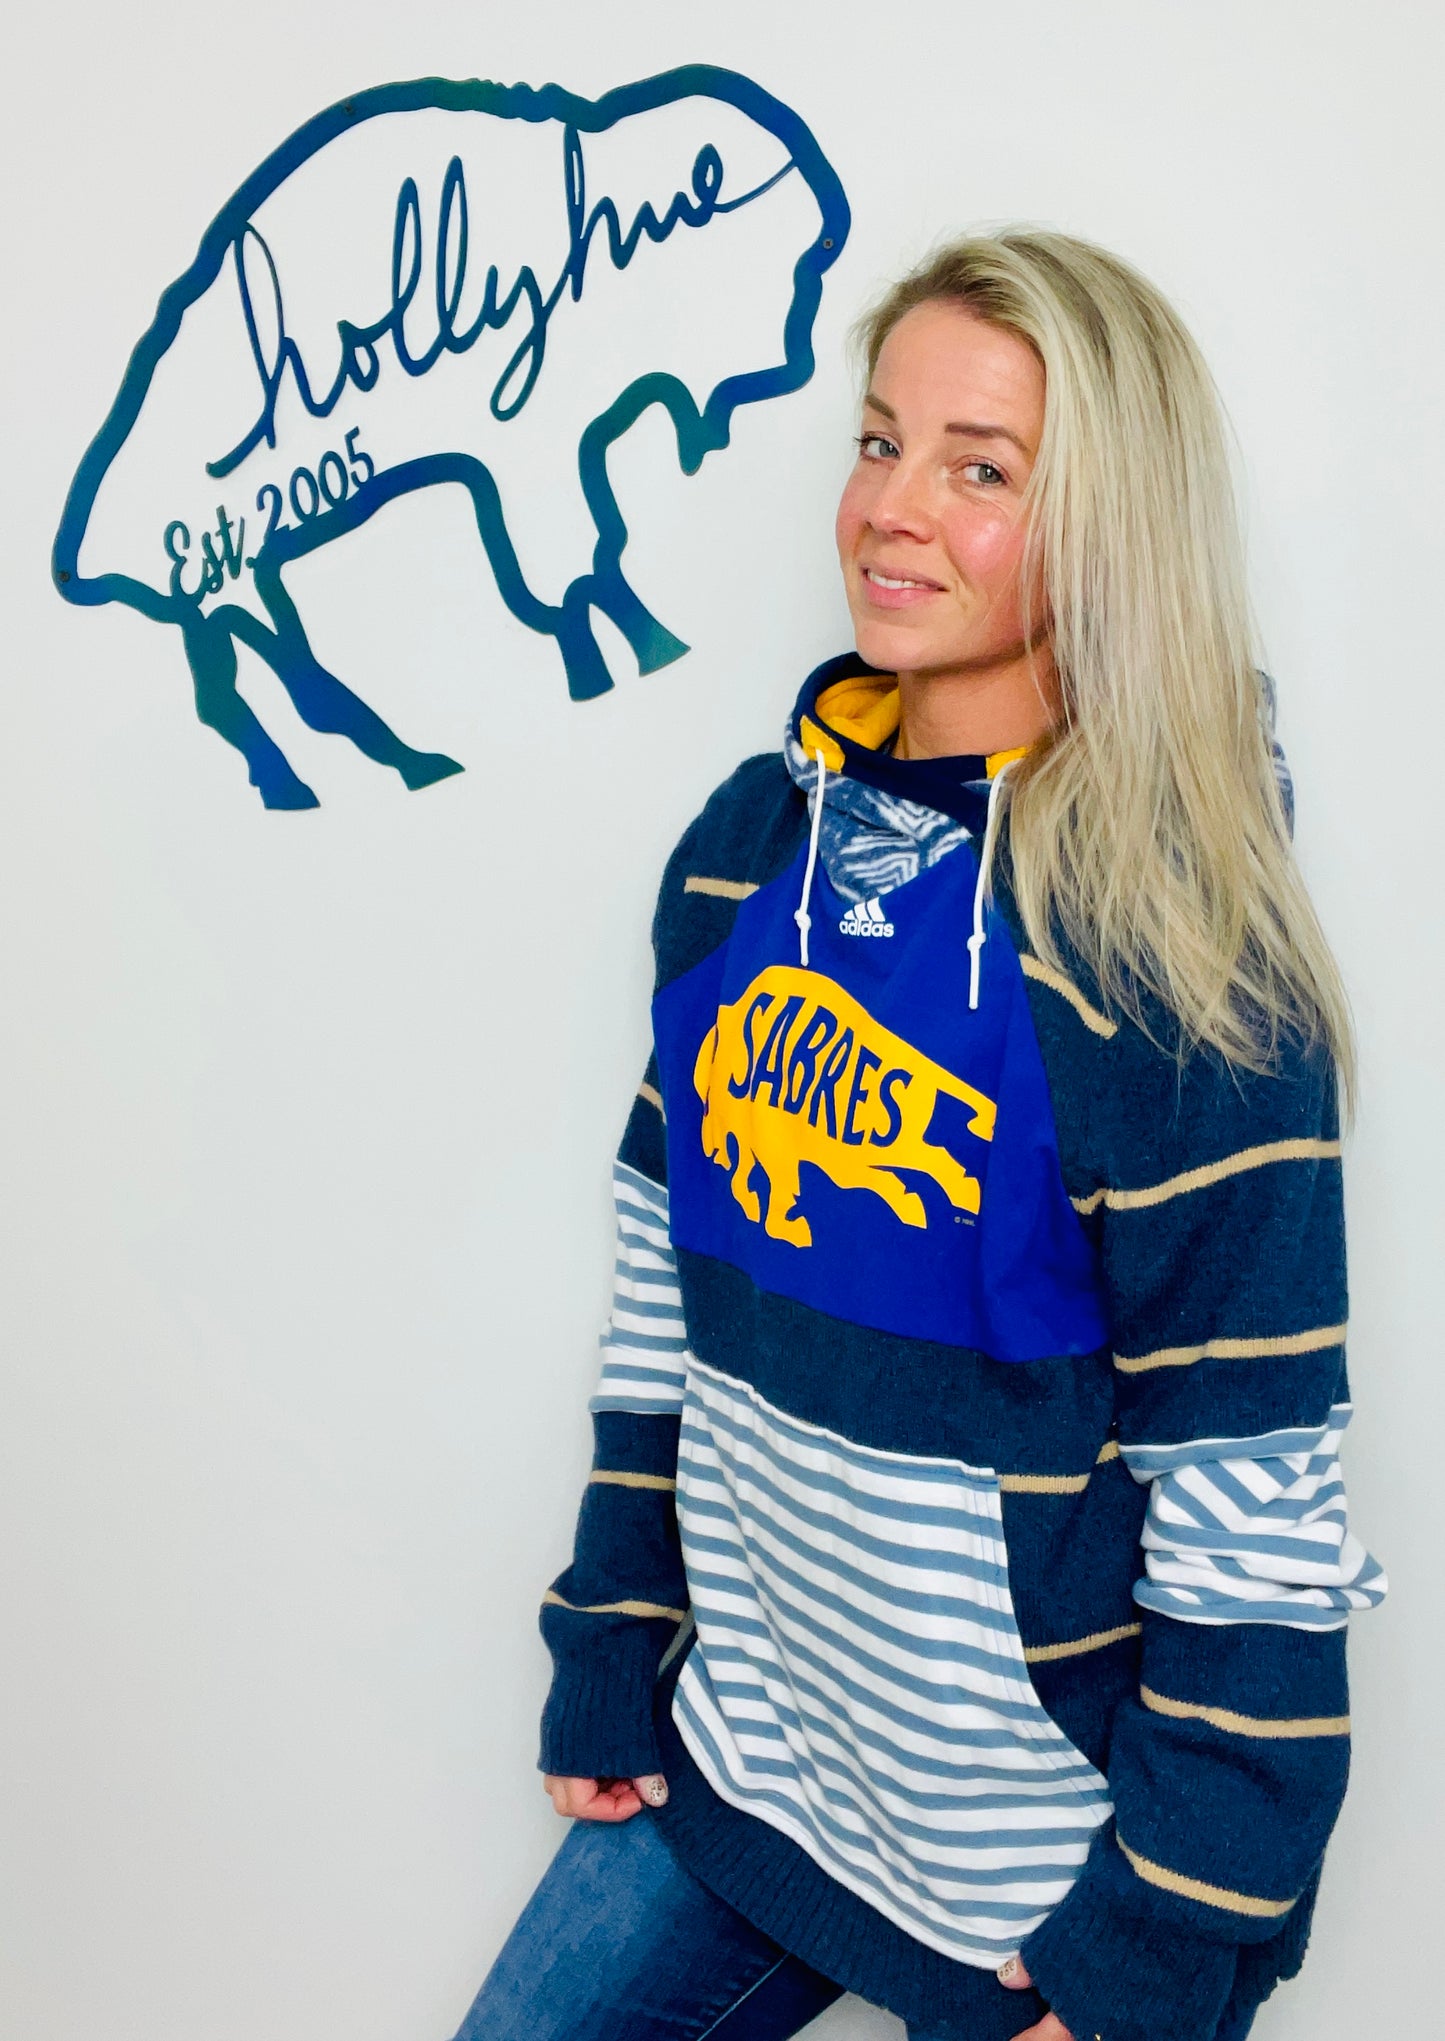 Striped Sweater Sabres Hoodie Size- Unisex M/L